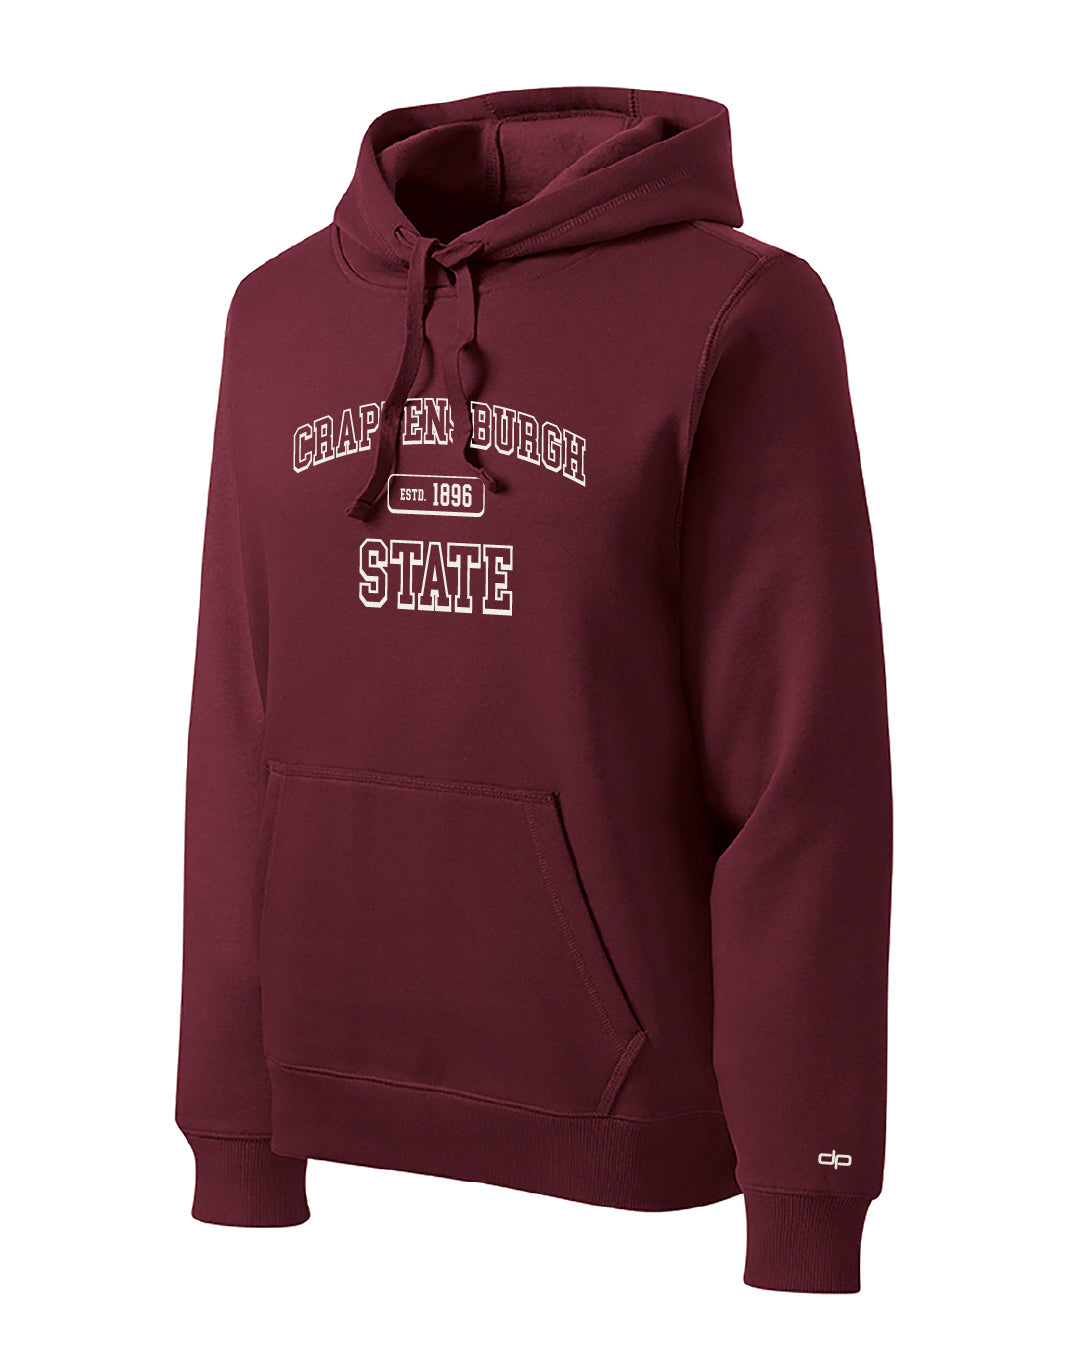 Crappensburgh State Hoodie